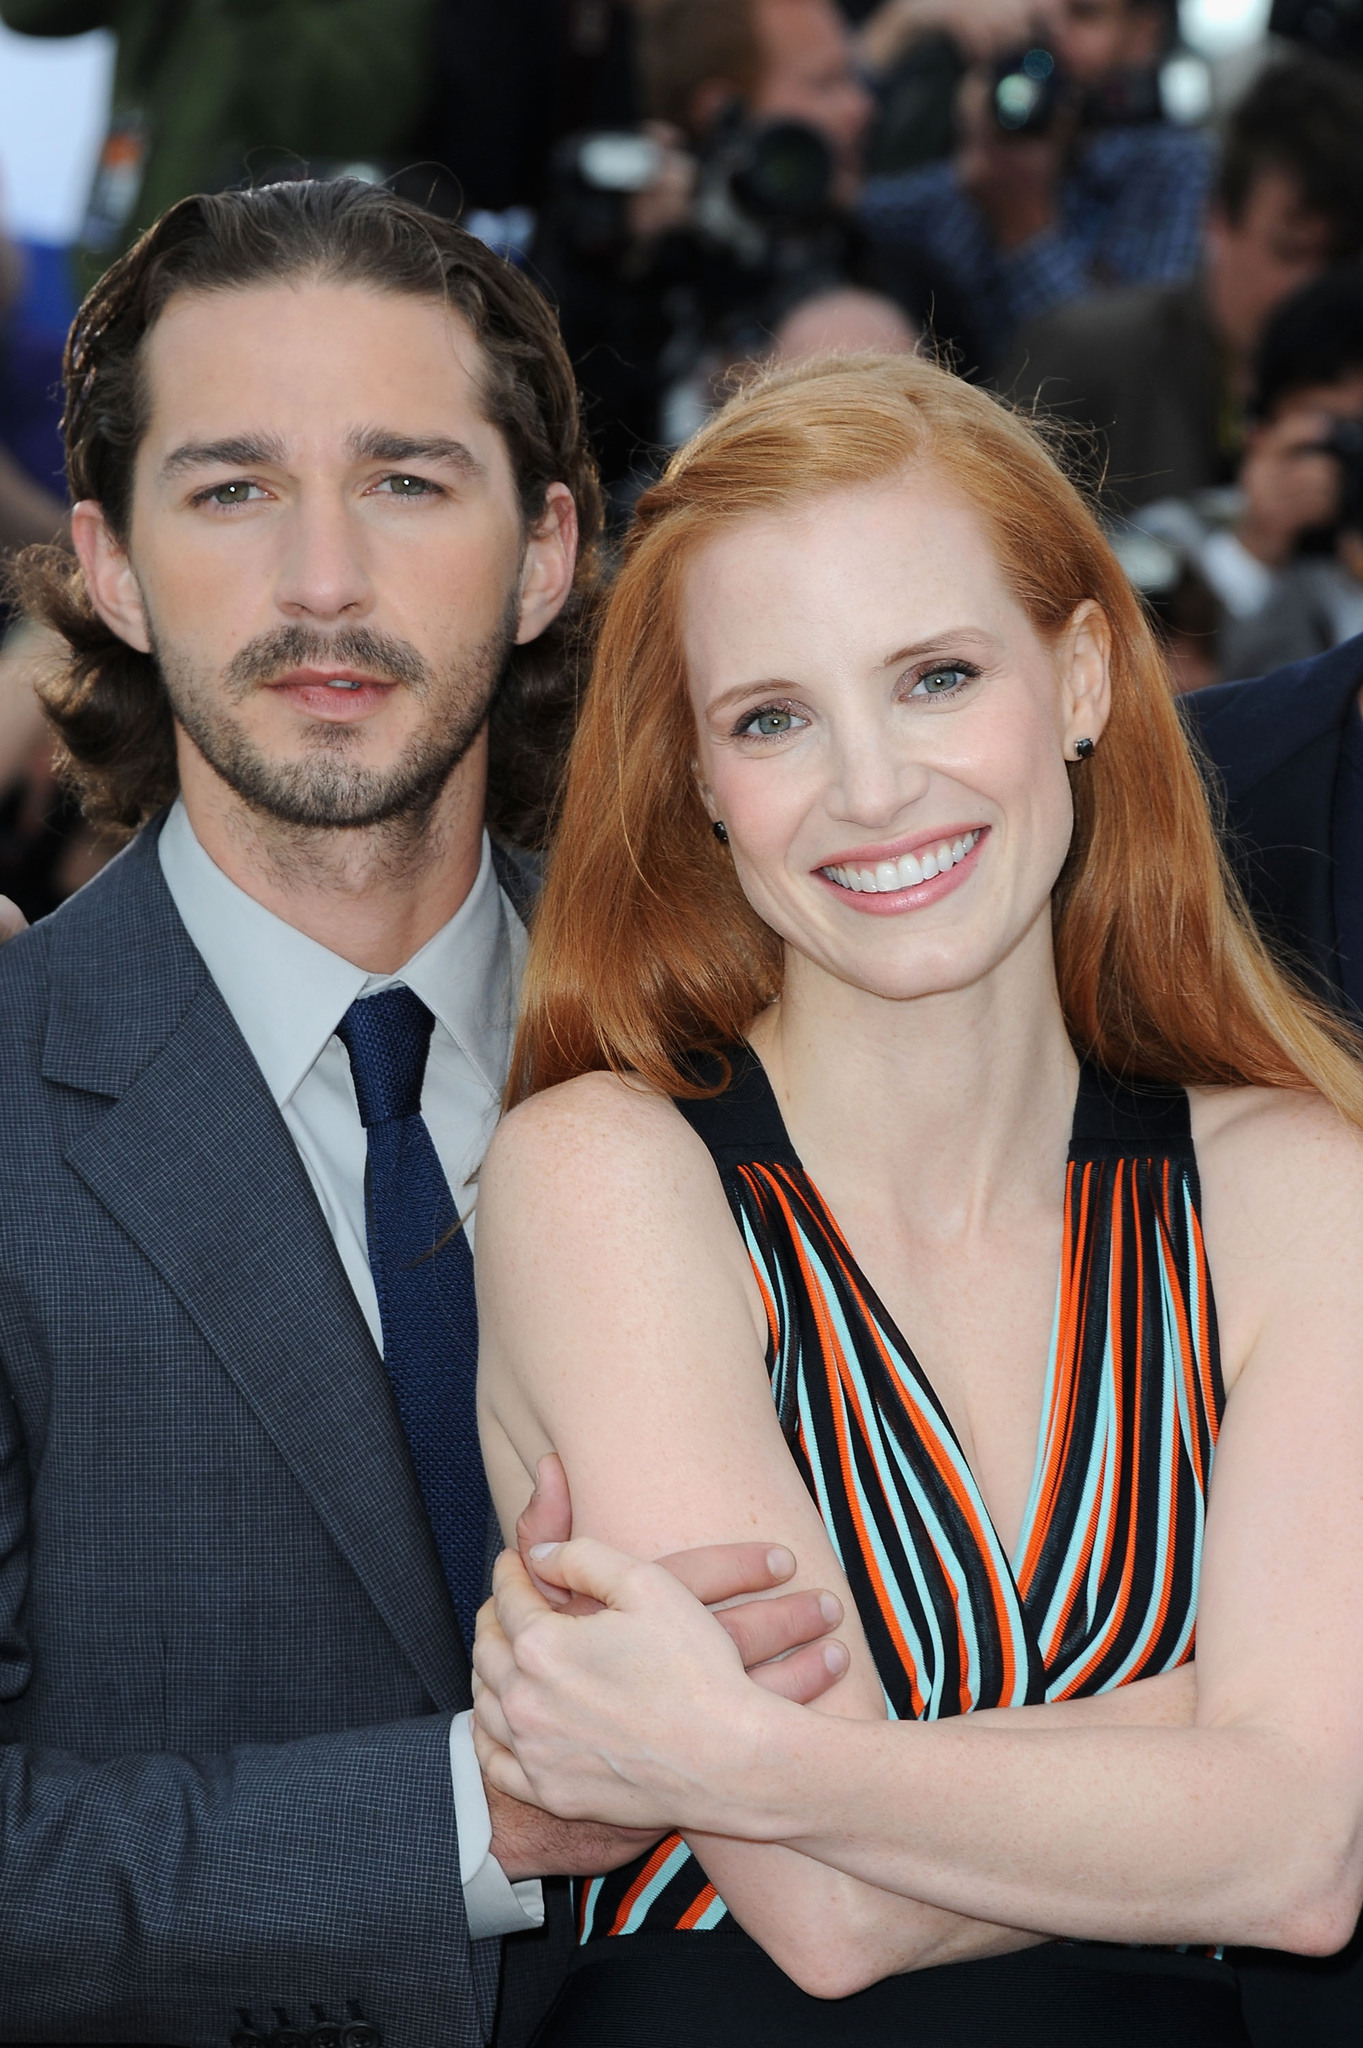 Shia LaBeouf and Jessica Chastain at event of Virs istatymo (2012)